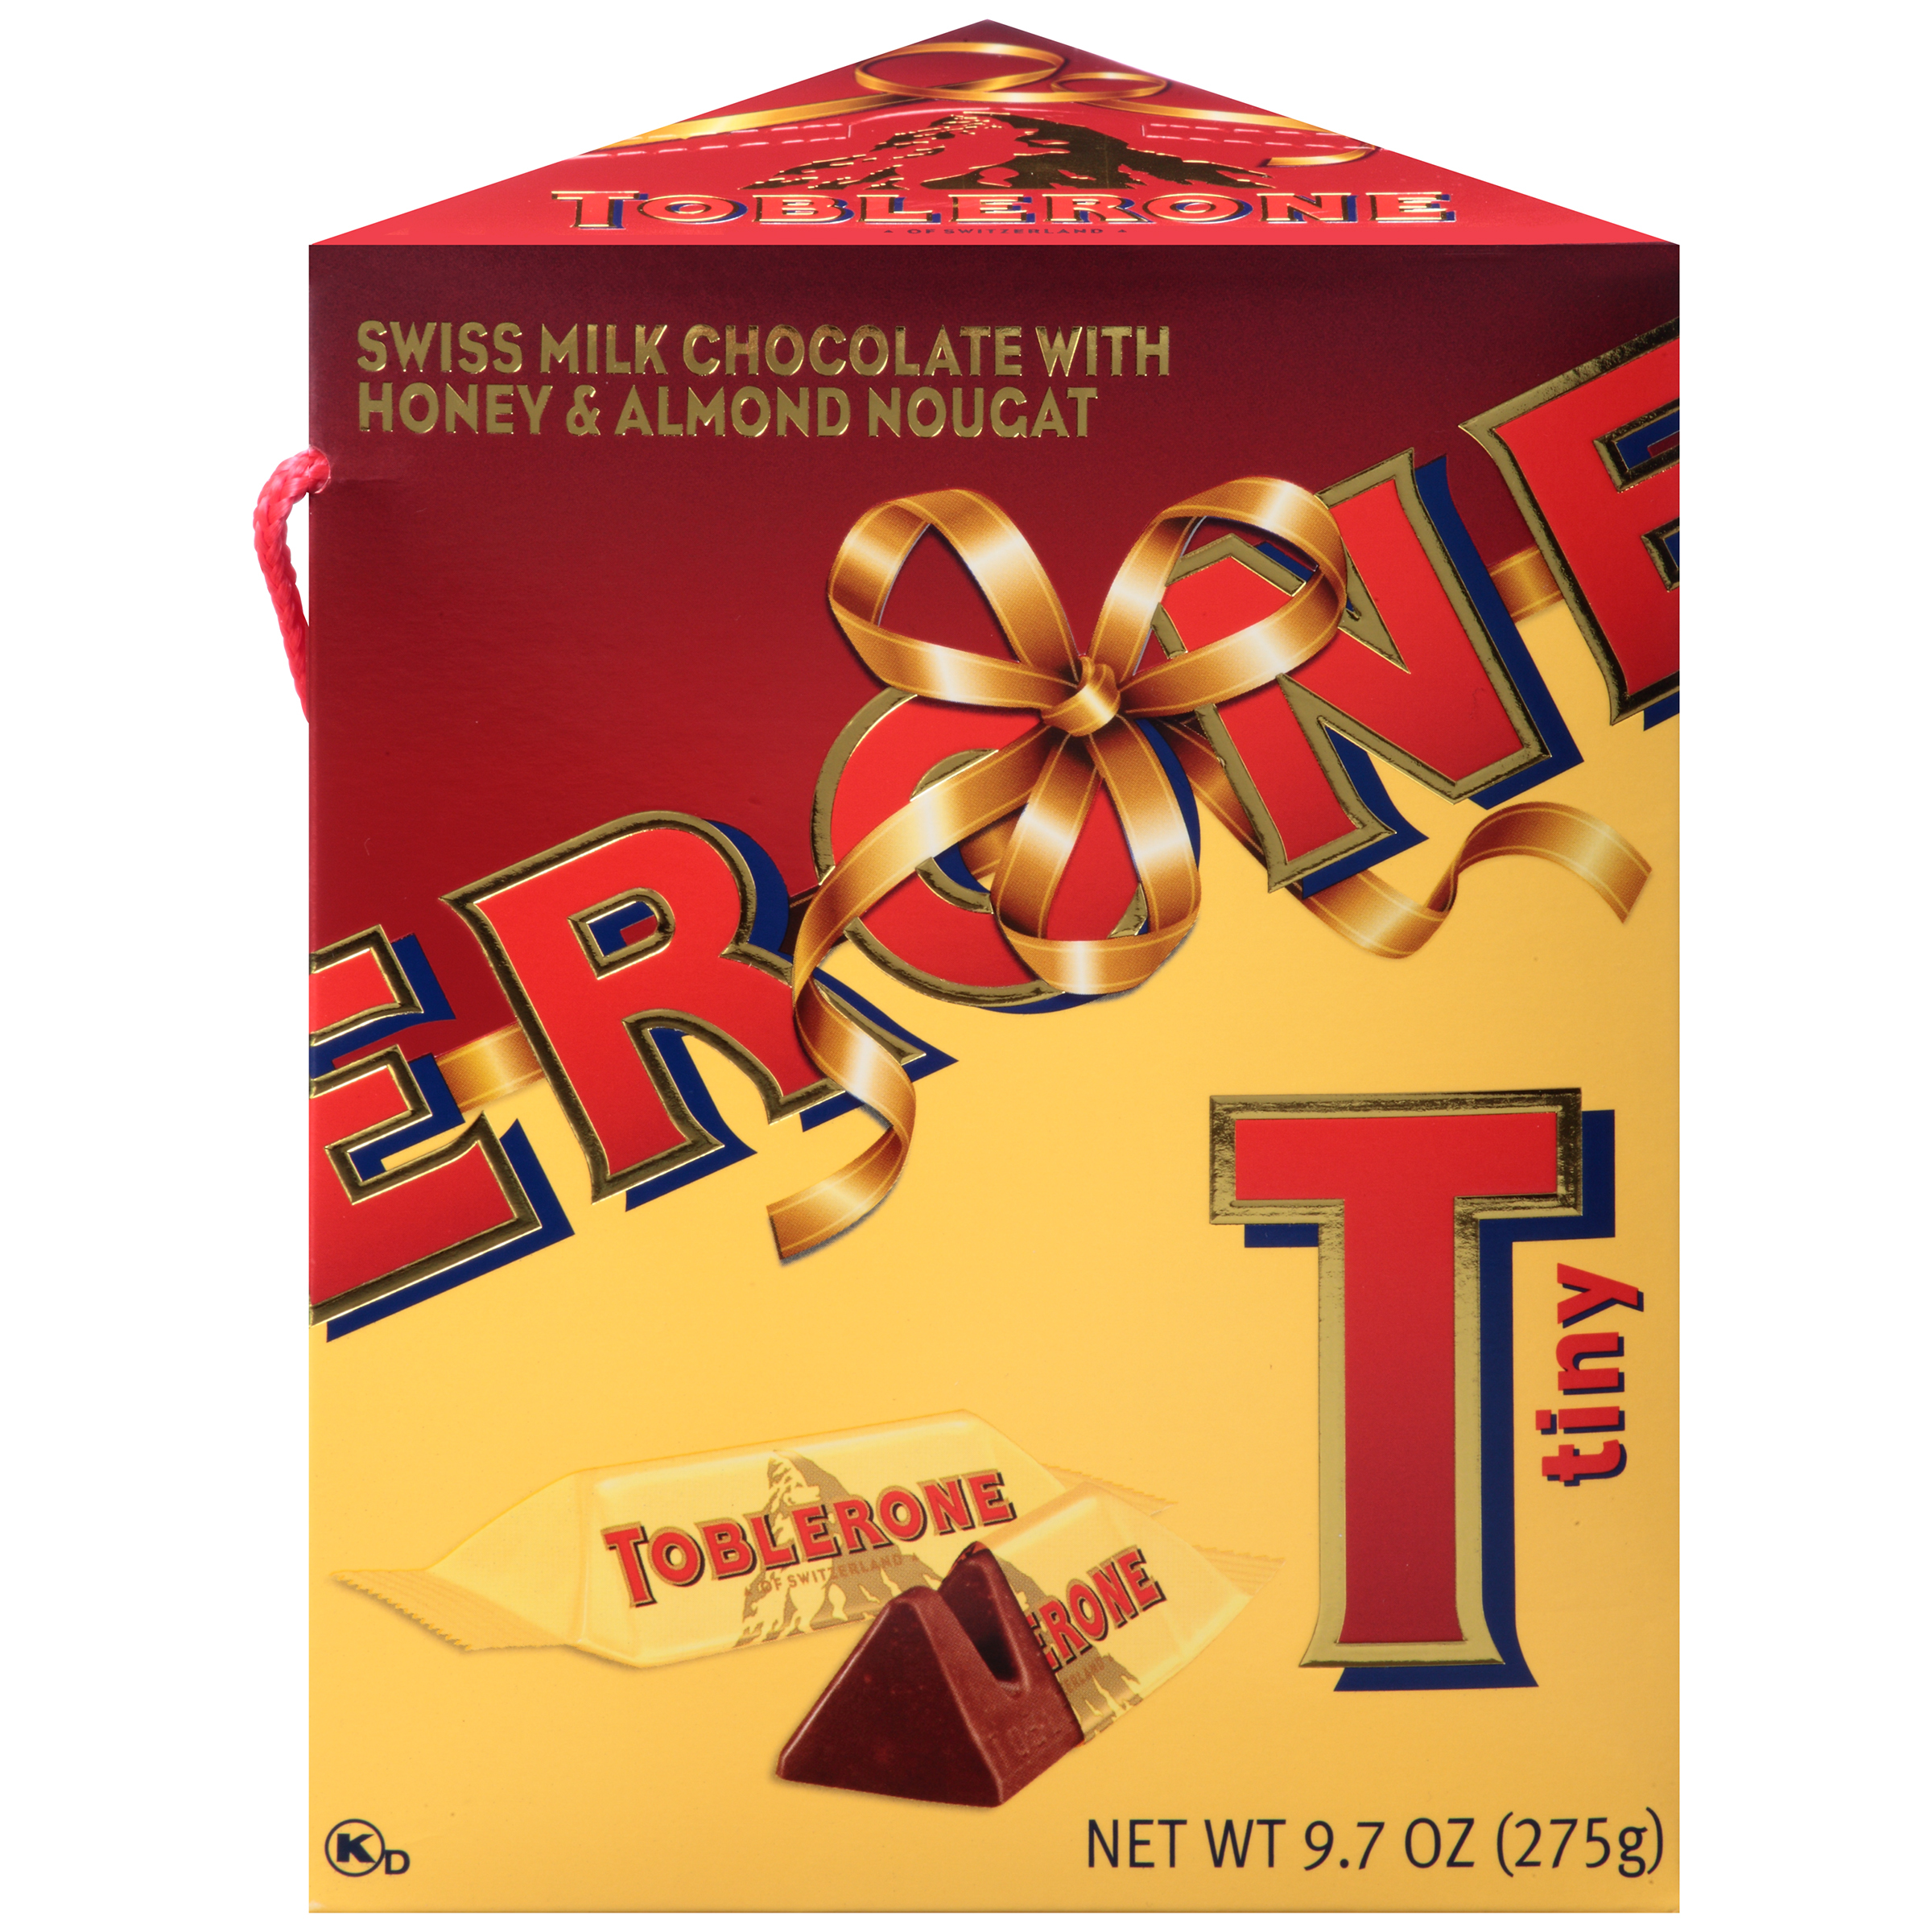 Toblerone Tiny Swiss Milk Chocolate Candy Bars with Honey and Almond Nougat, Holiday Chocolate Gift Box, 9.7 oz